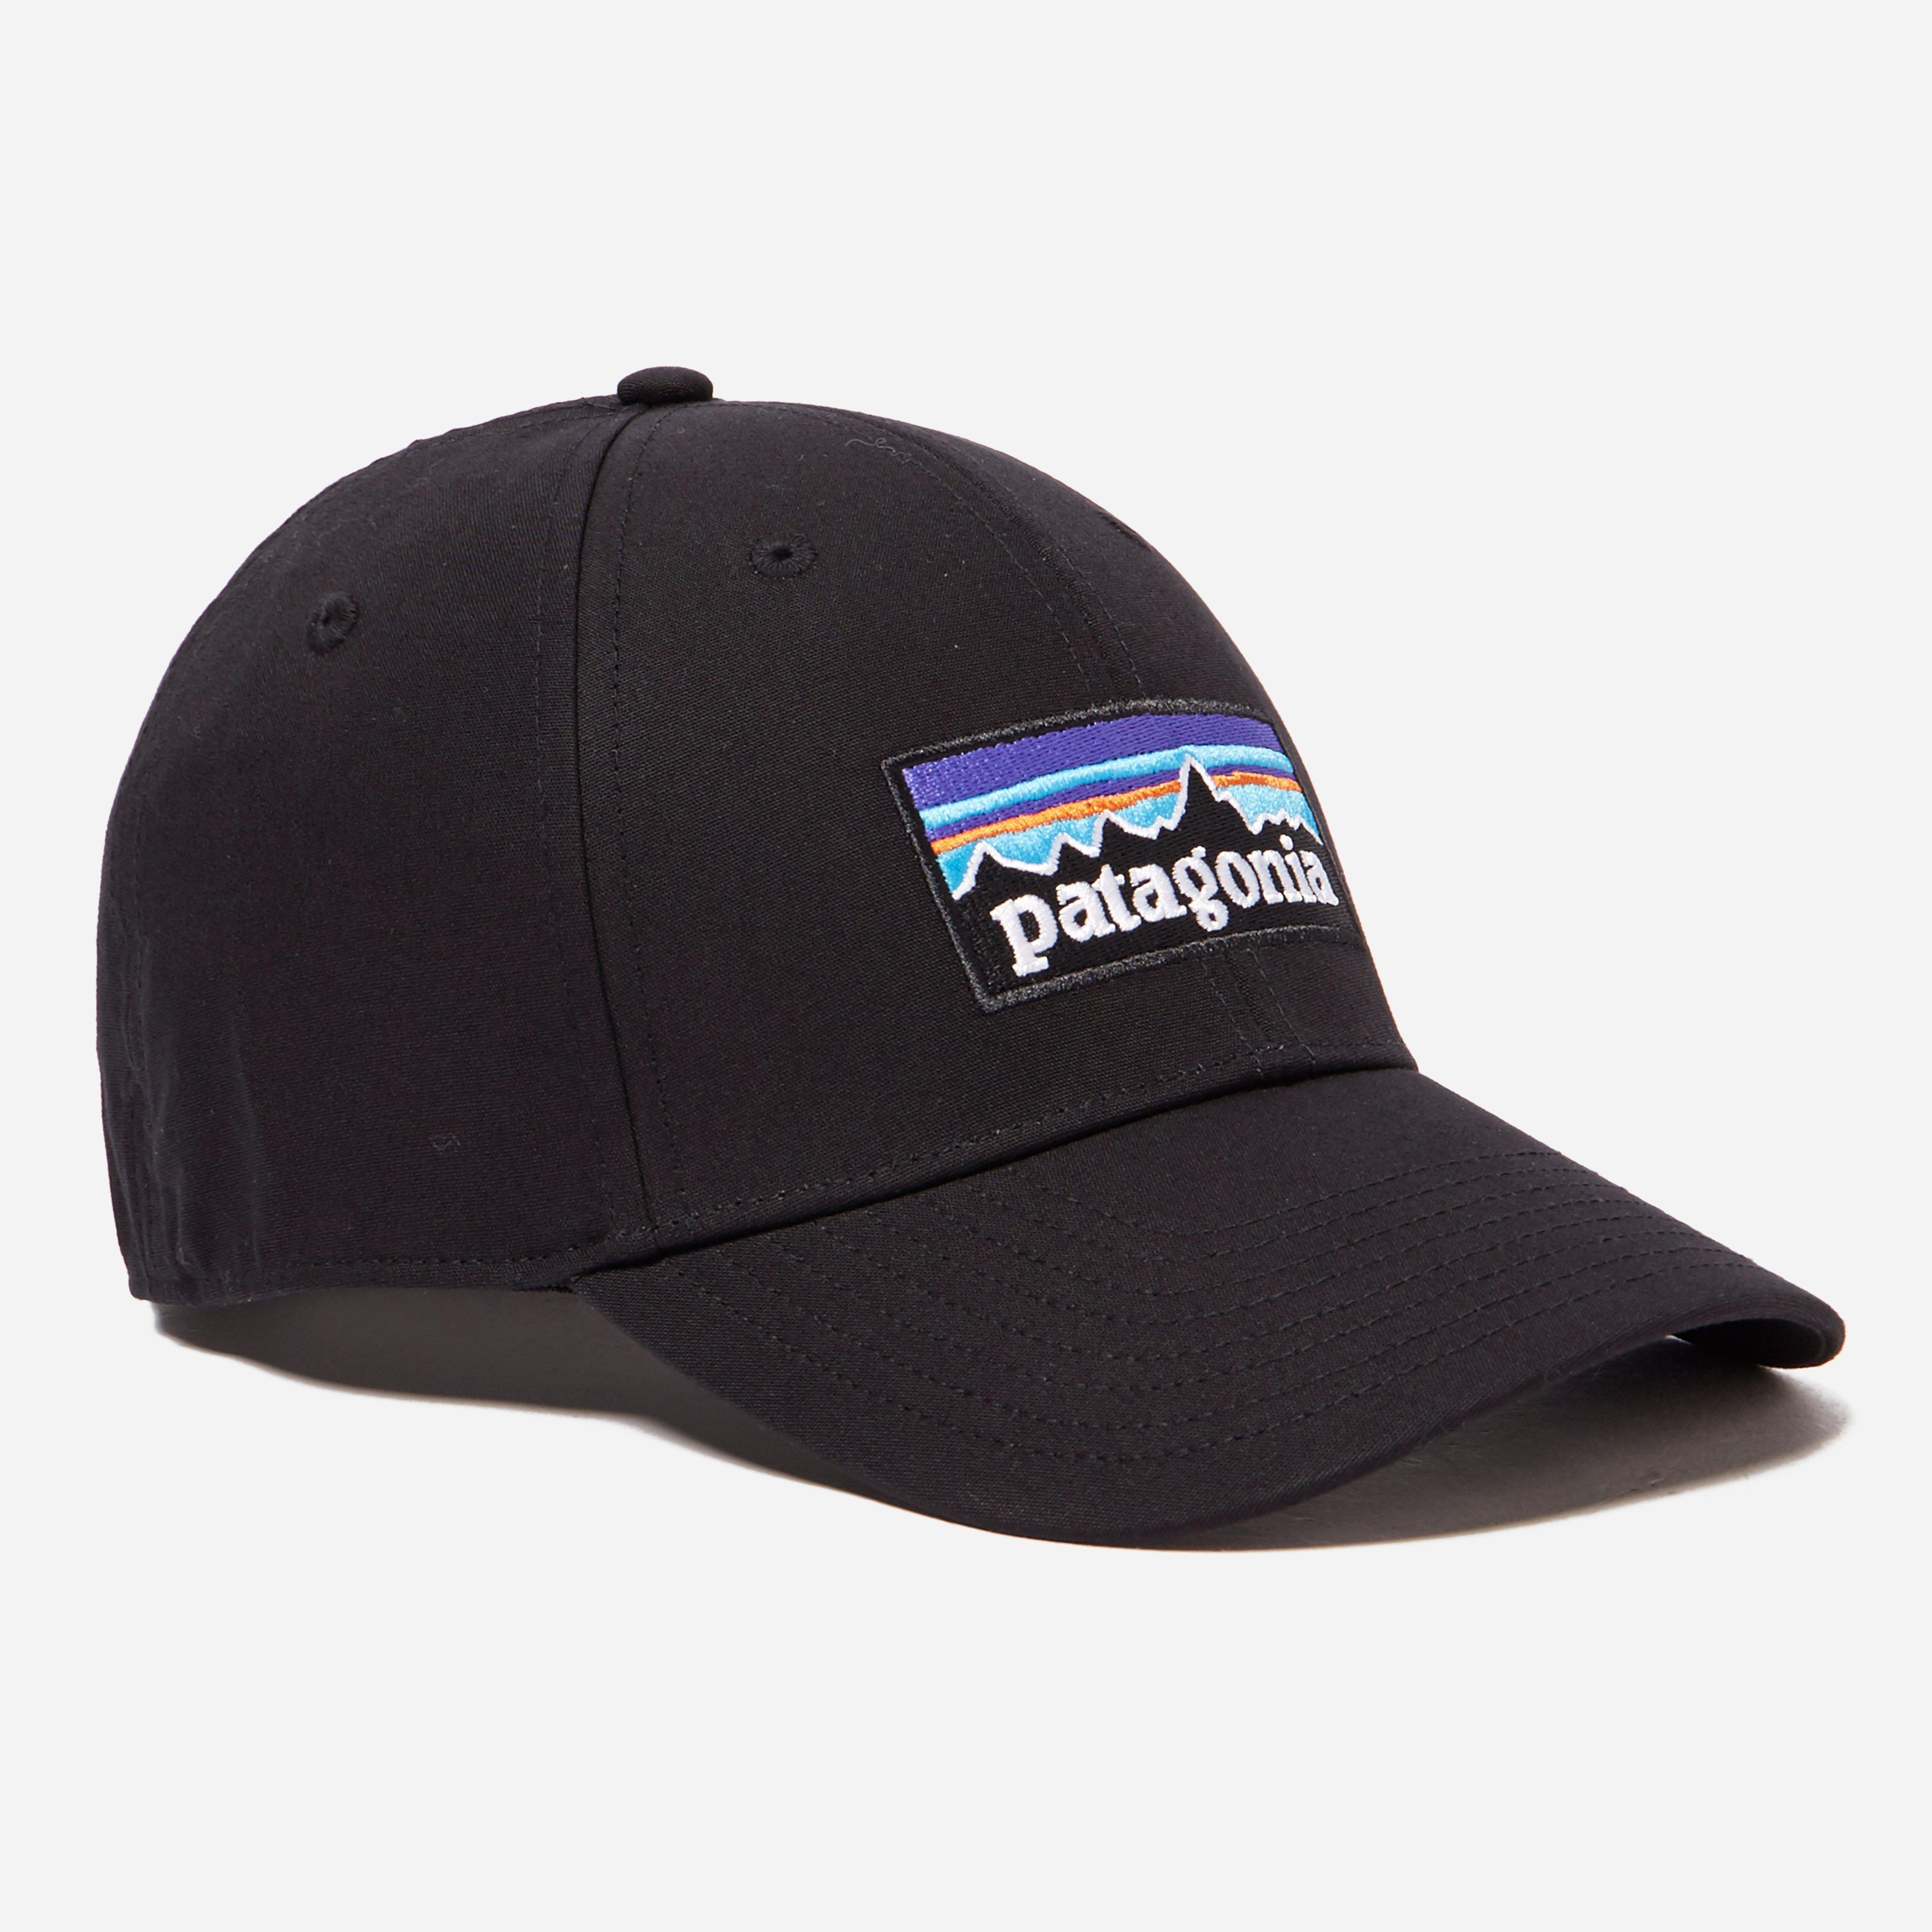 Patagonia P6 Logo Stretch Fit Hat in Black for Men - Lyst